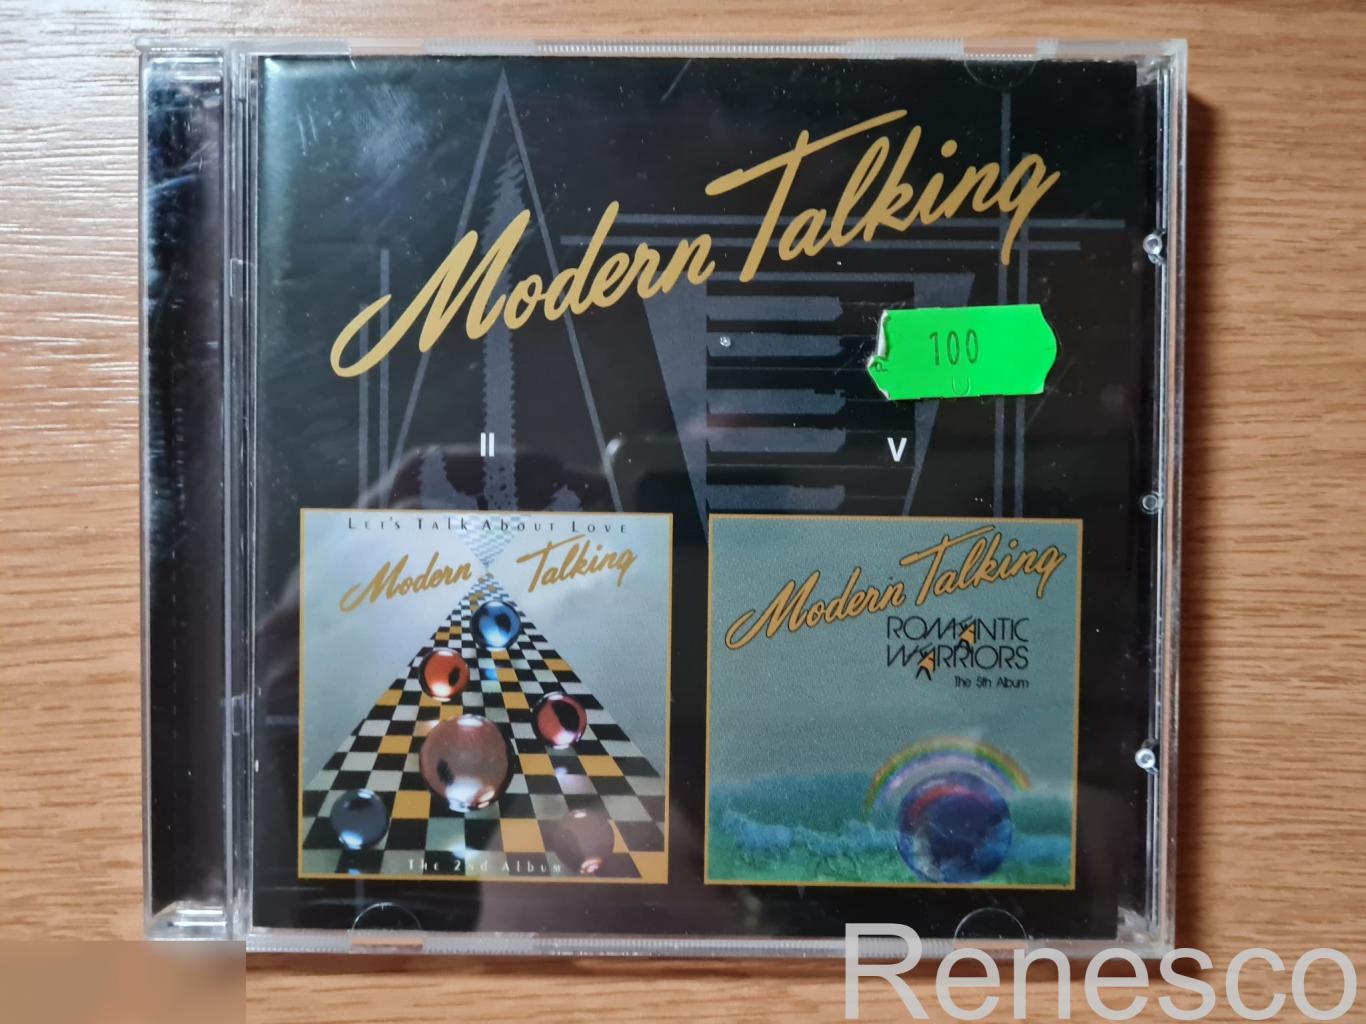 Modern Talking ?– Let's Talk About Love / Romantic Warriors (Russia) (2000) (Uno